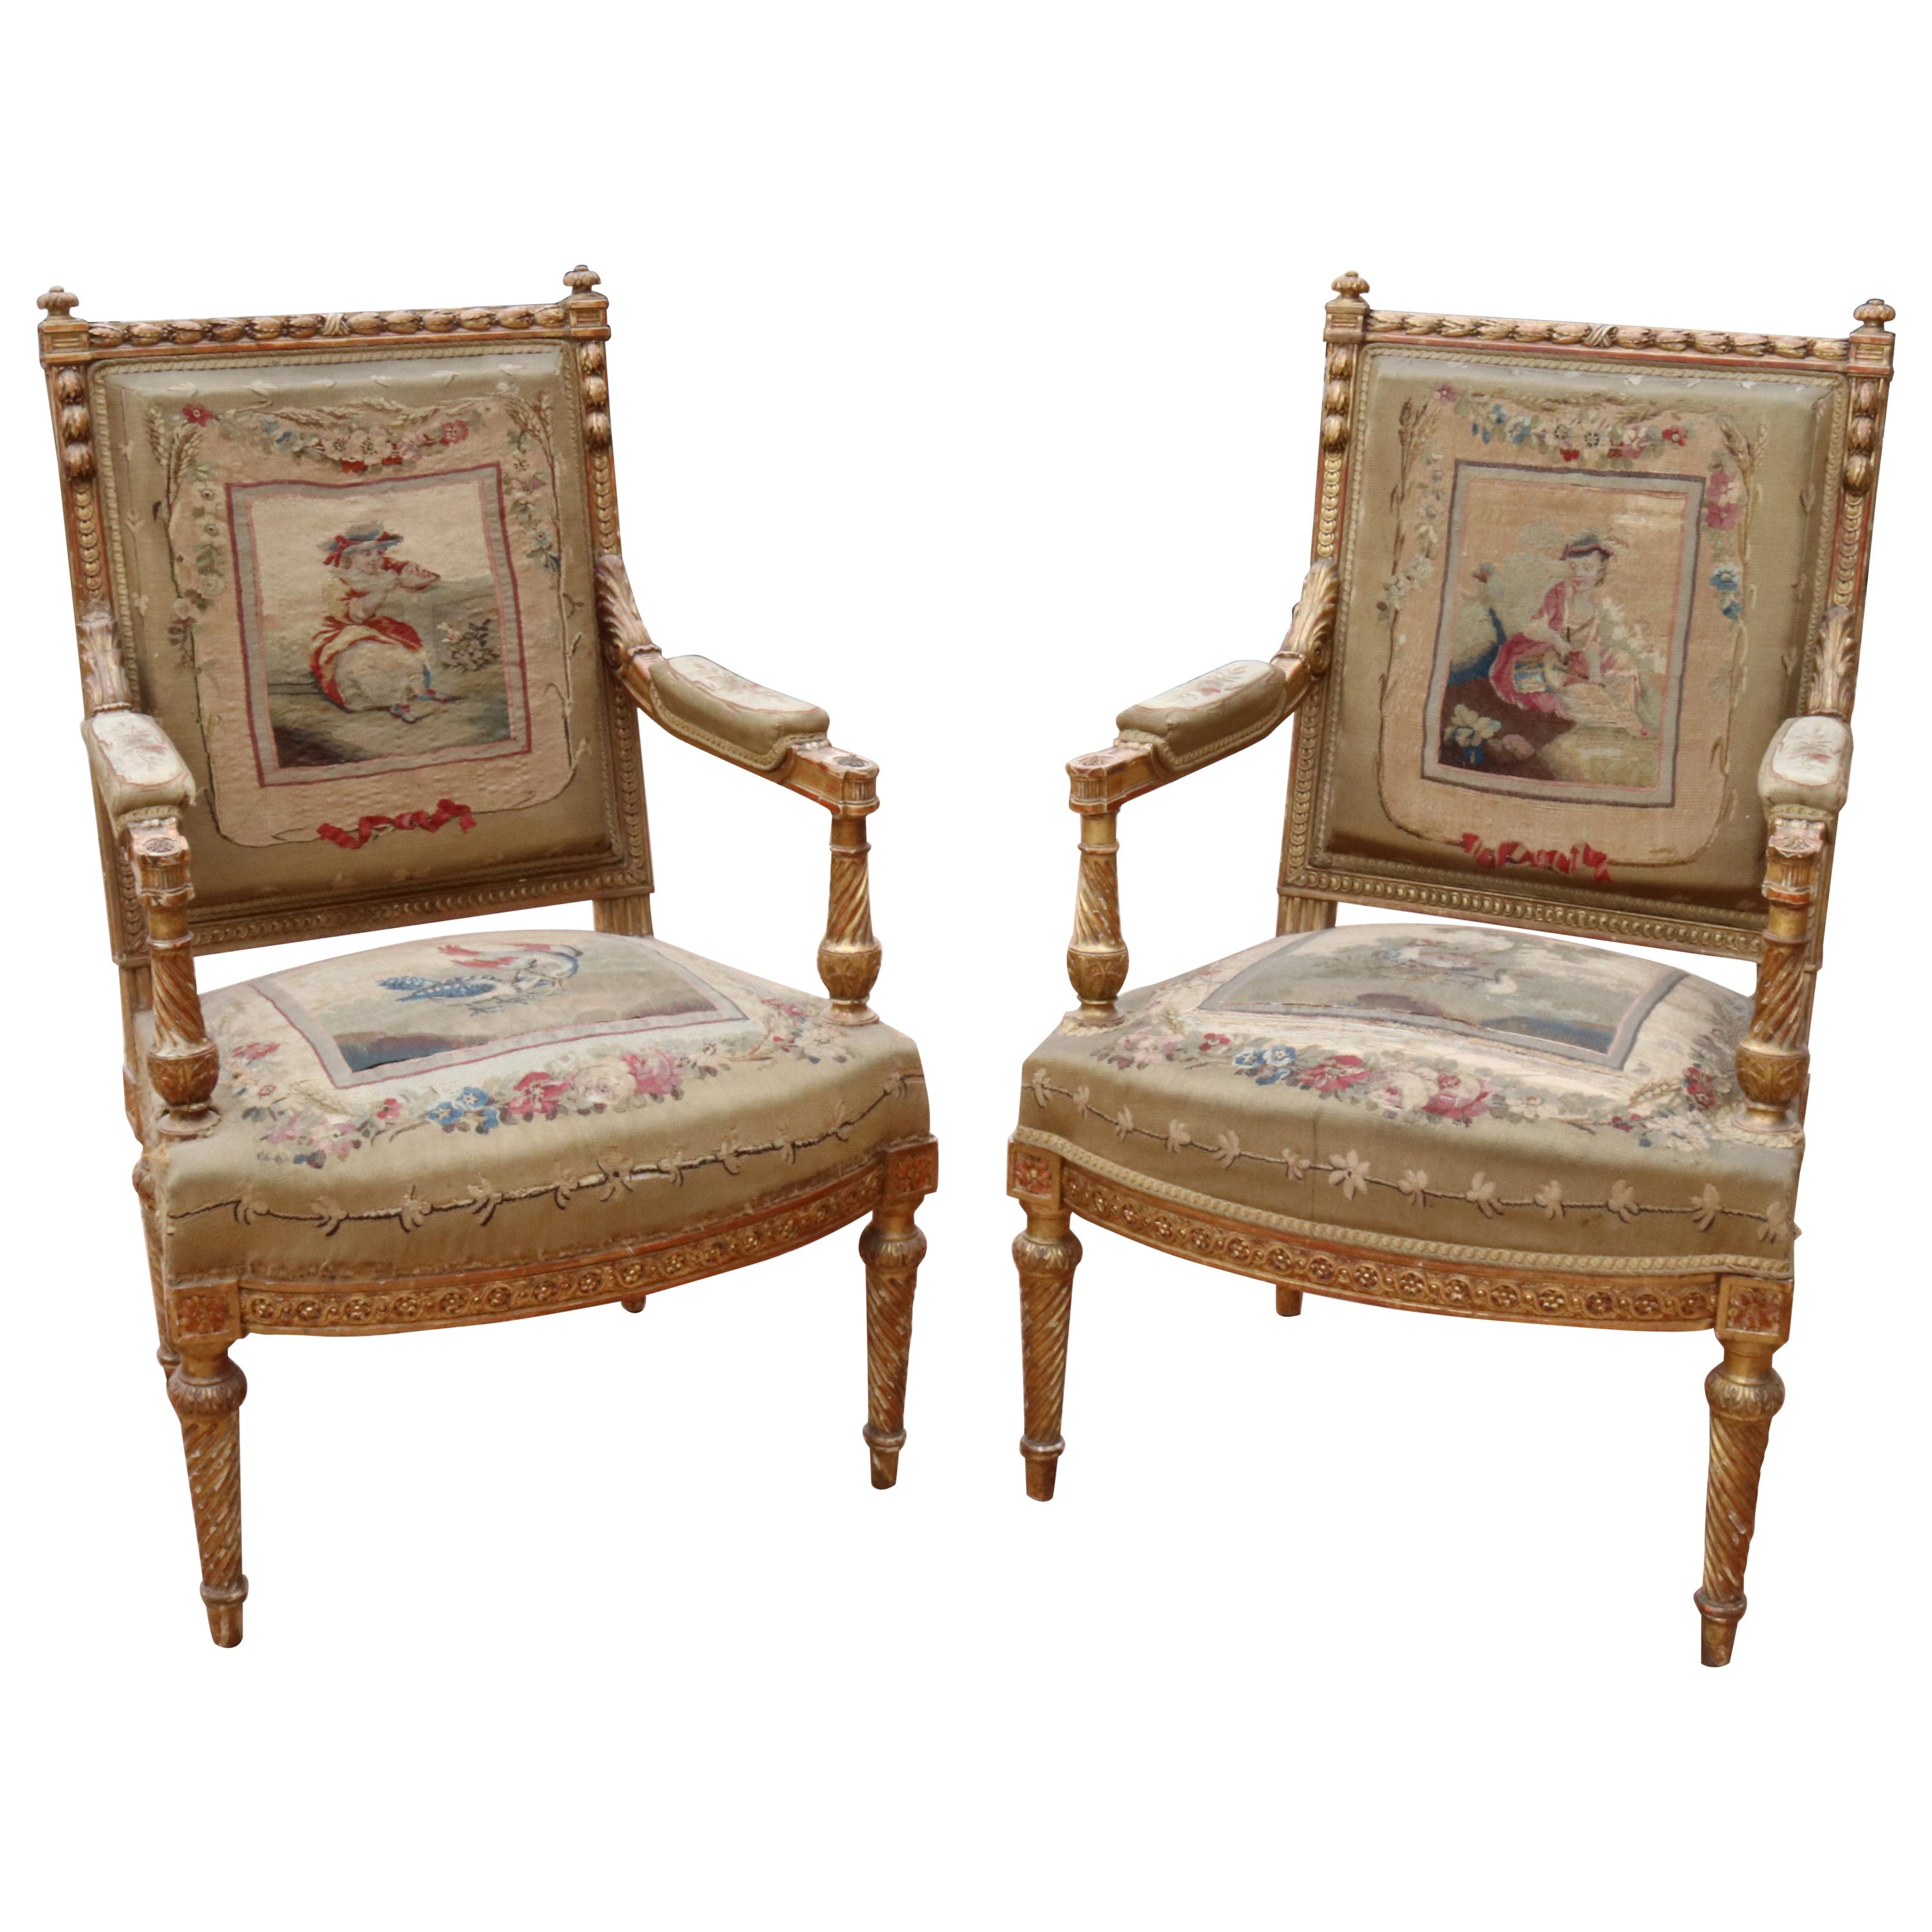 18th Century Pair of French Aubusson Armchairs with Gilded Wooden Frames